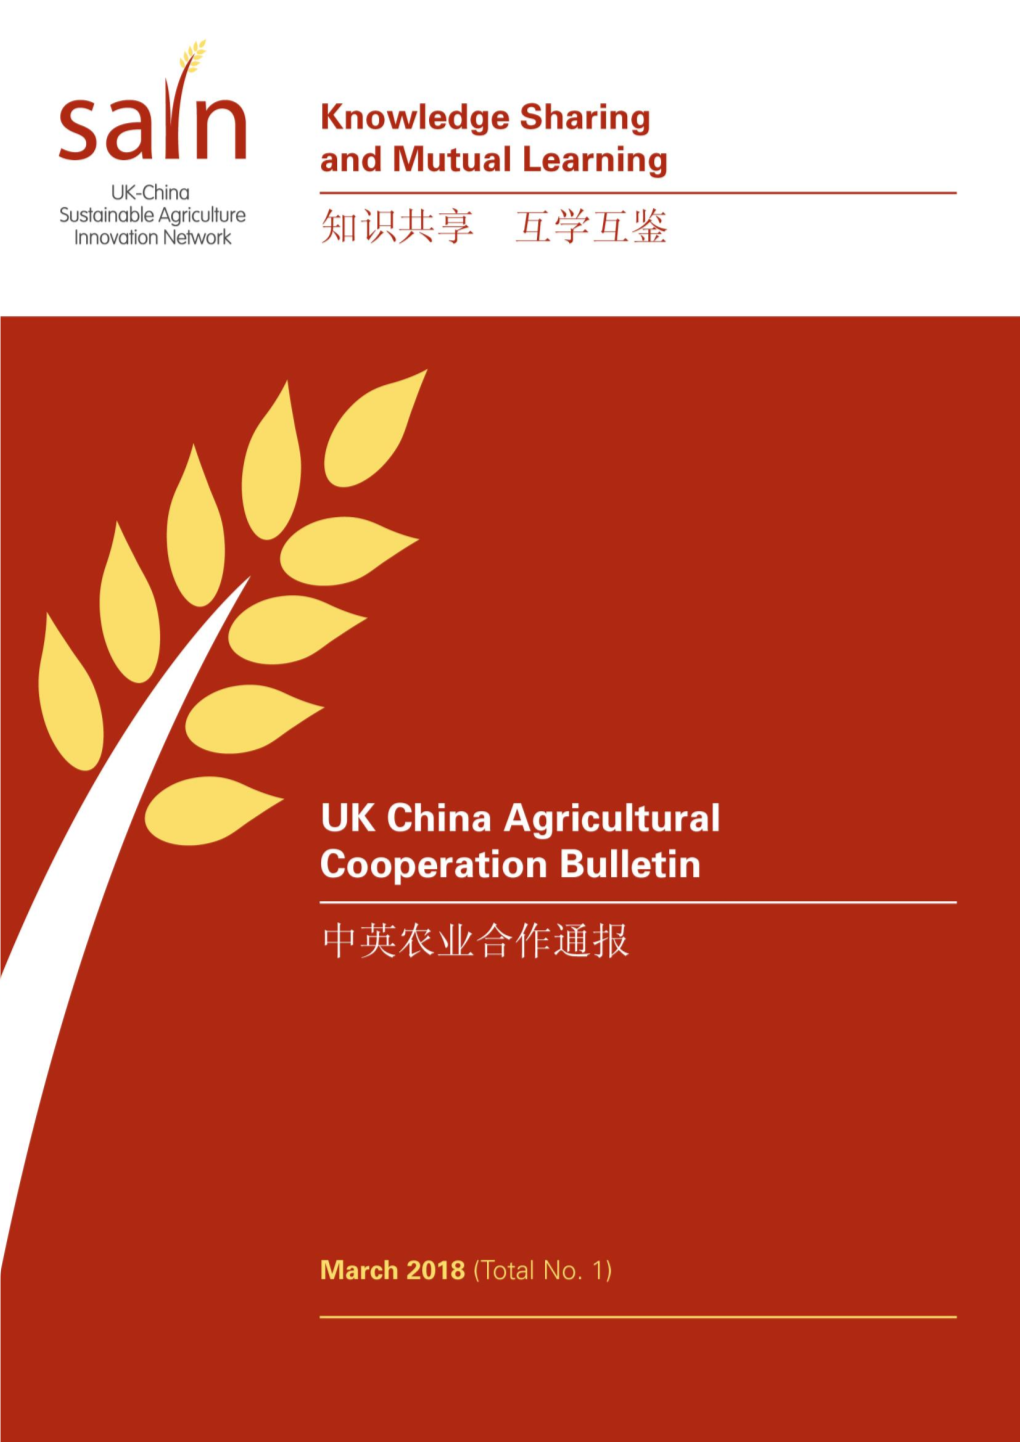 UK China Agricultural Cooperation Bulletin 中英农业合作通报 March 2018 (Total No